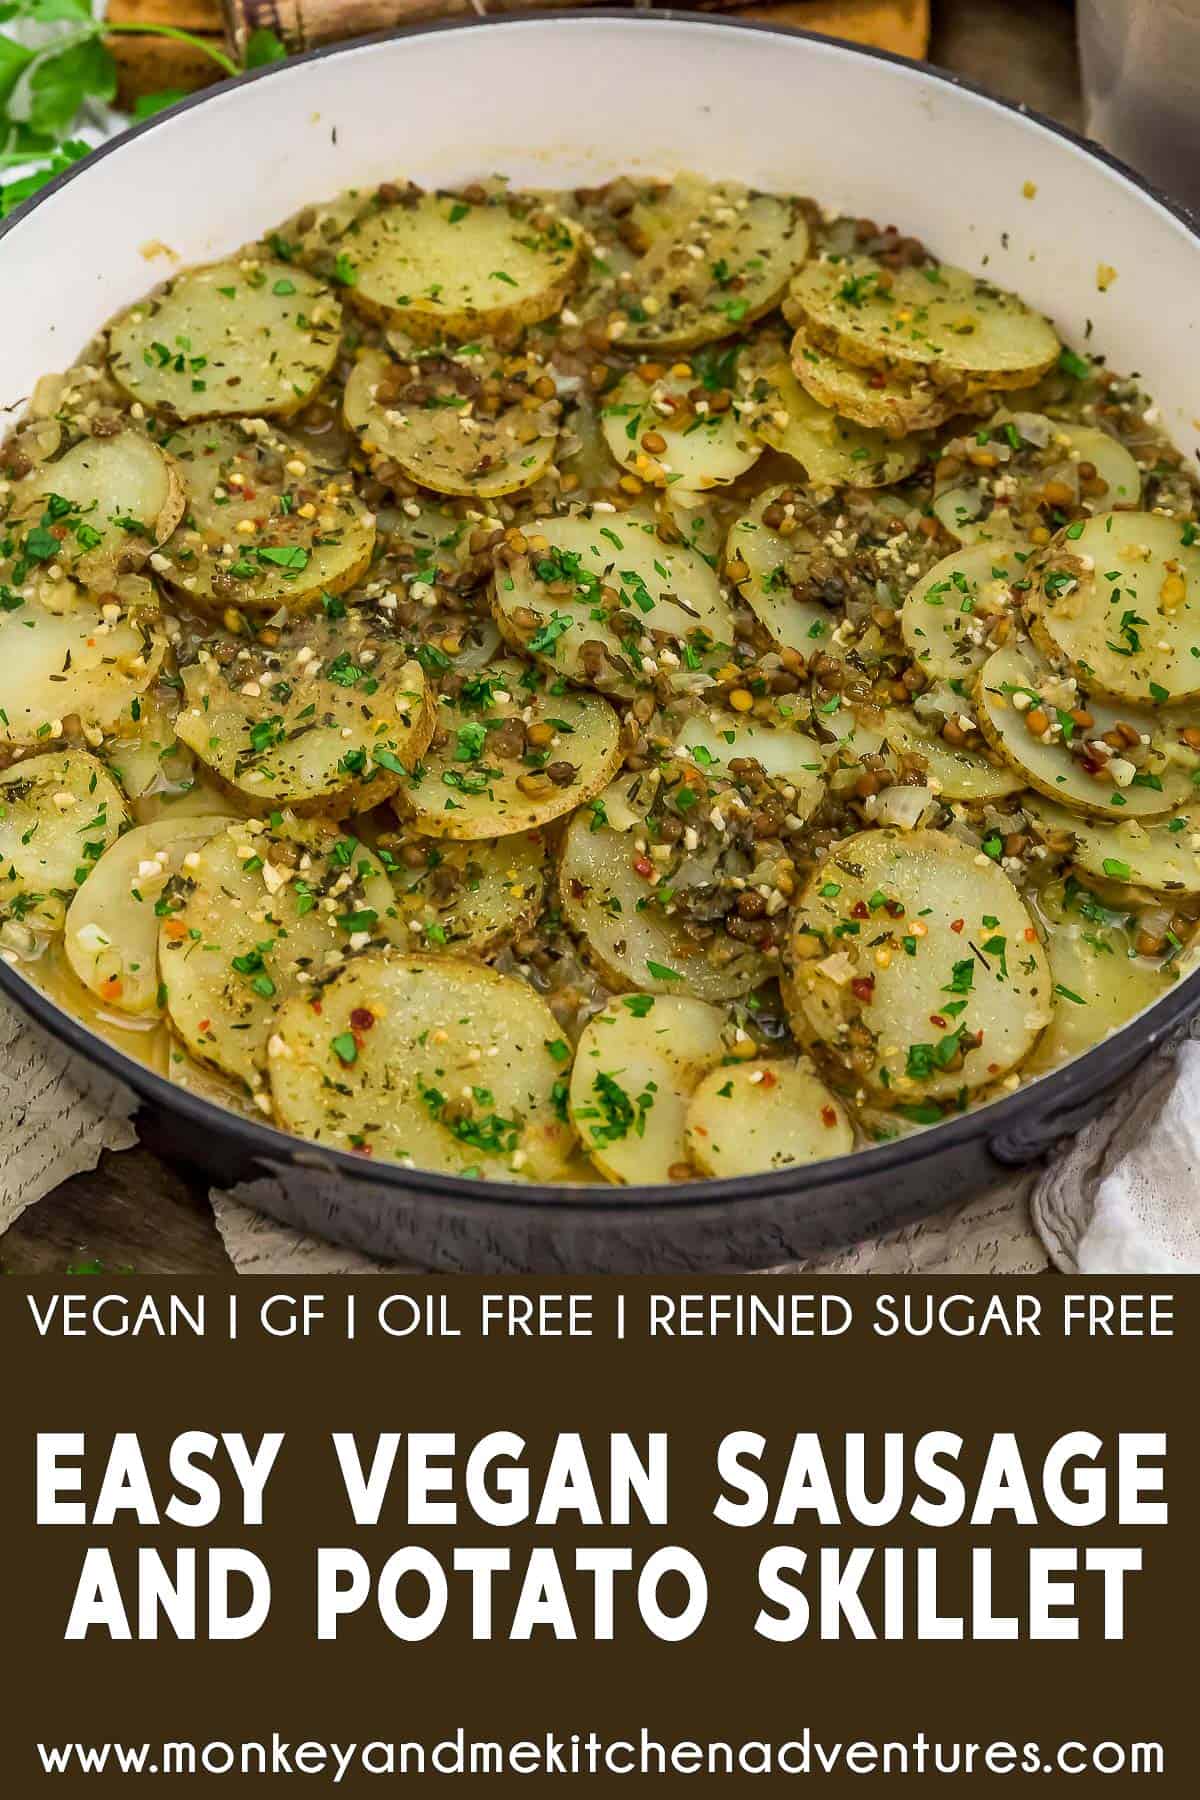 Easy Vegan “Sausage” and Potatoes Skillet with text description